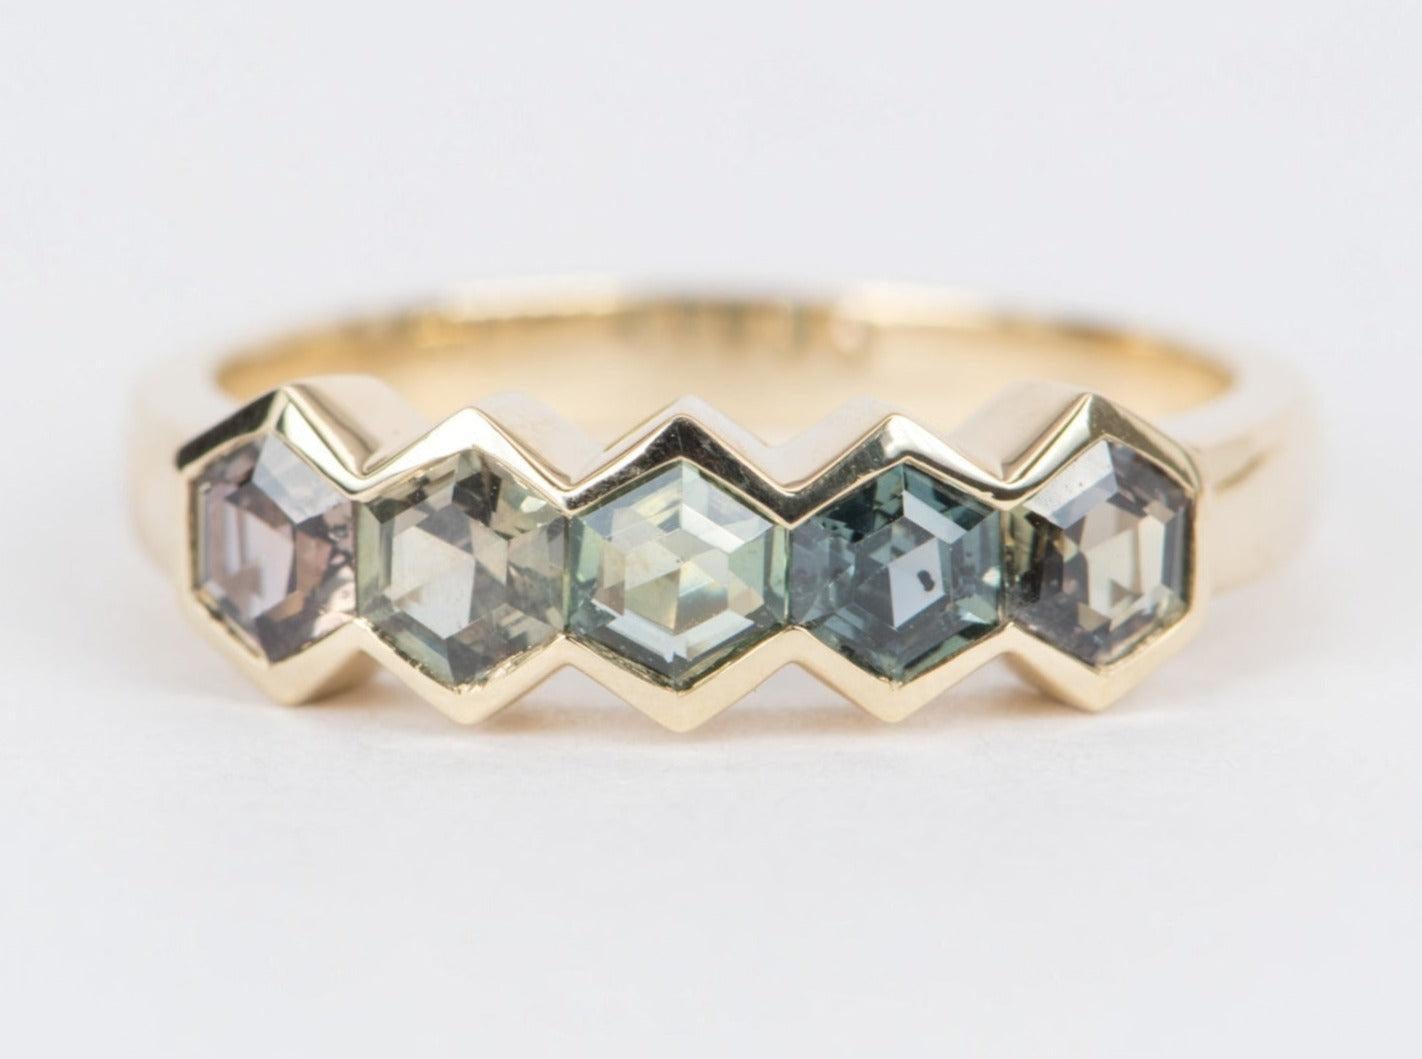 ♥ Solid 14k yellow gold ring set with beautiful hexagon-shaped Montana sapphires in a bezel setting
♥ Gorgeous blue green color!
♥ The item measures 5.5 mm in length, 17.5 mm in width, and stands 3.8 mm from the finger, band width 2.7mm

♥ Gemstone: